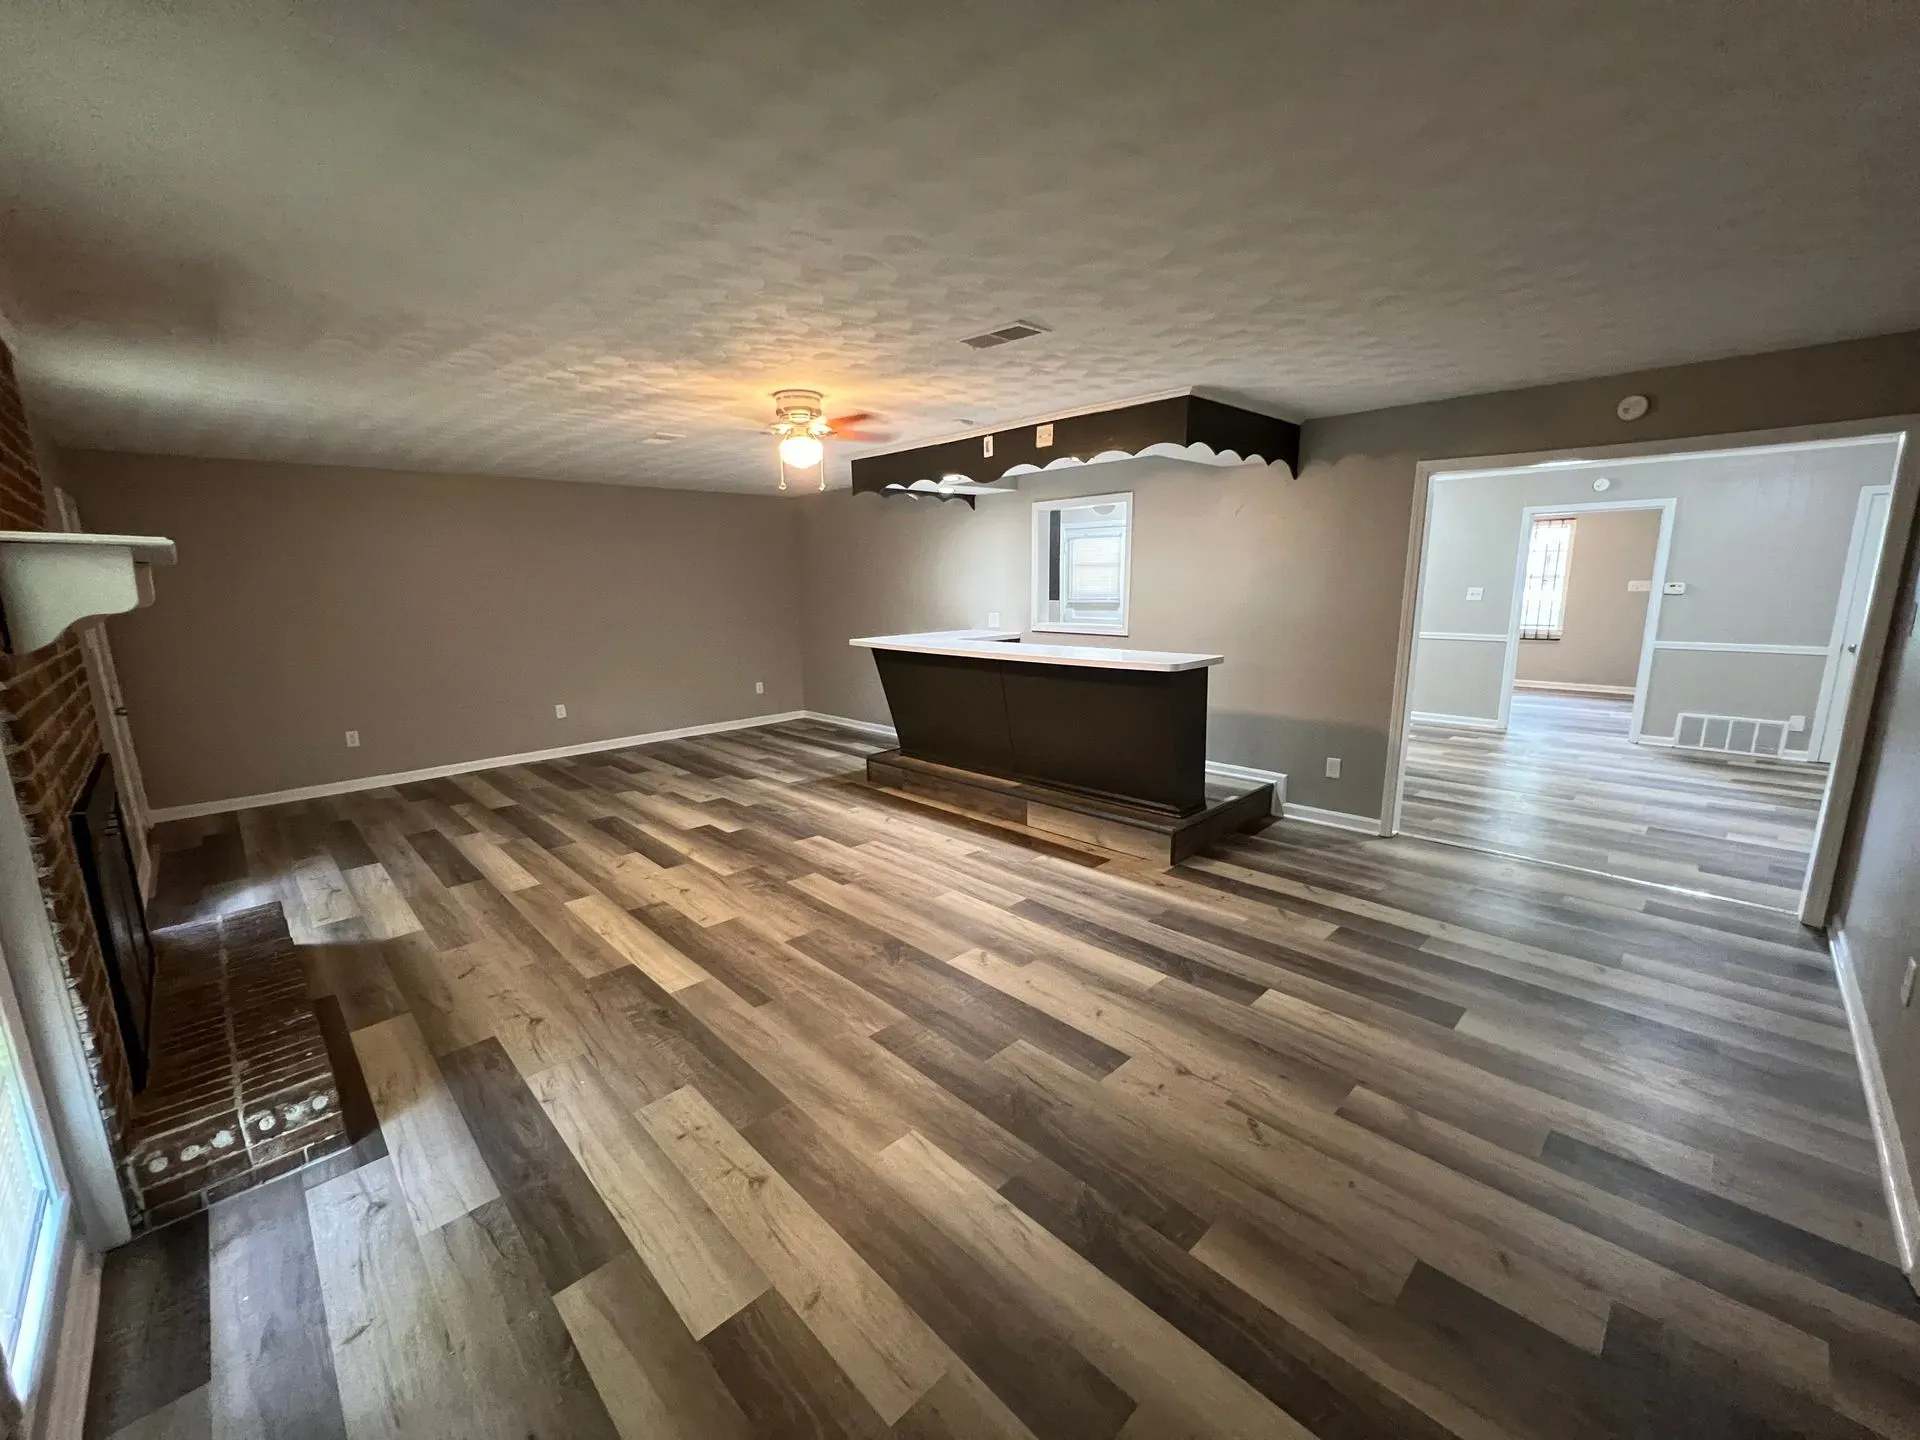 A wide angle view of the new floor and painted living room after renovation.